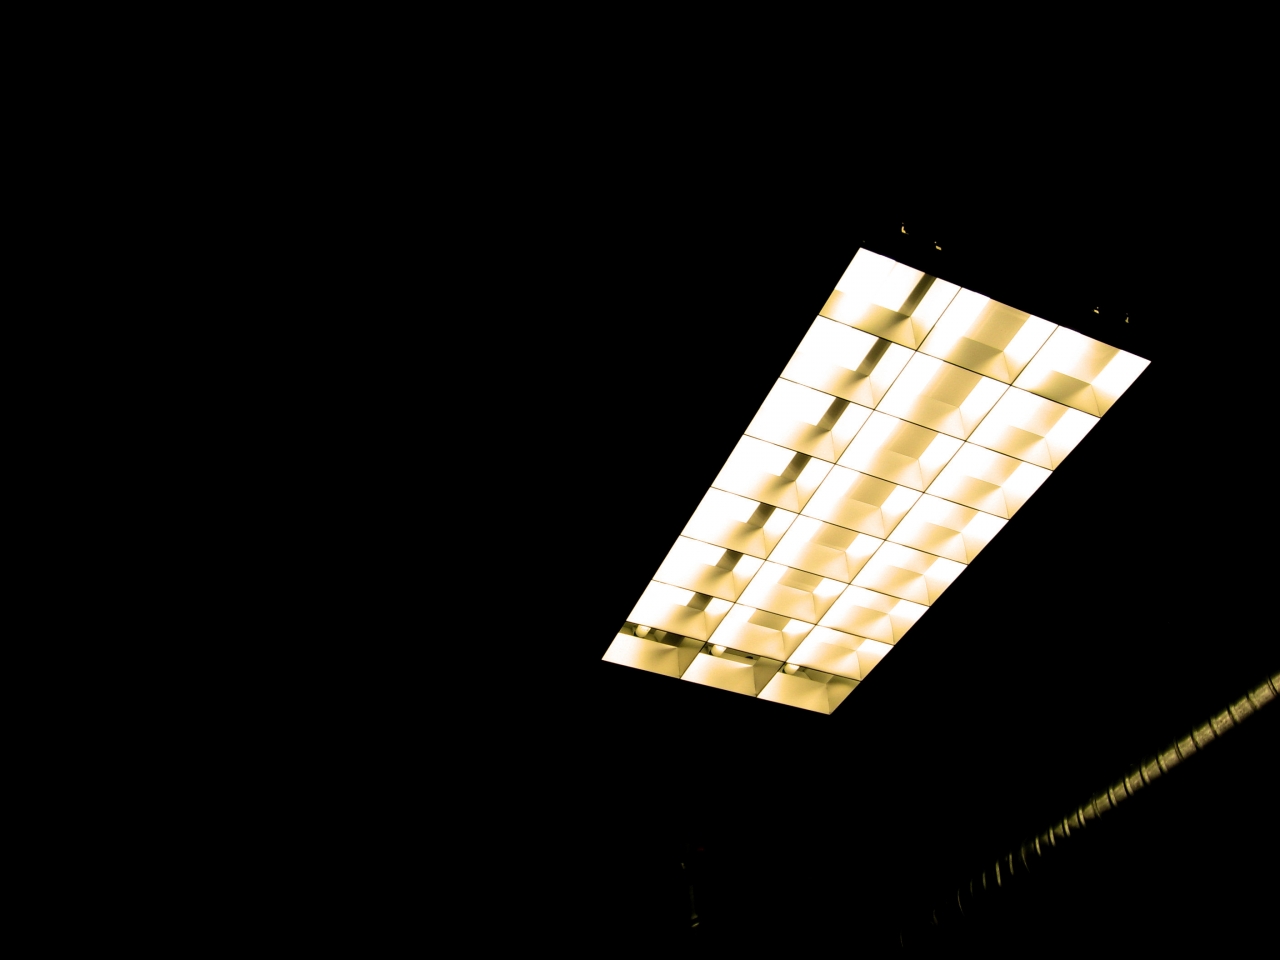 Overhead florescent lights in a laboratory.